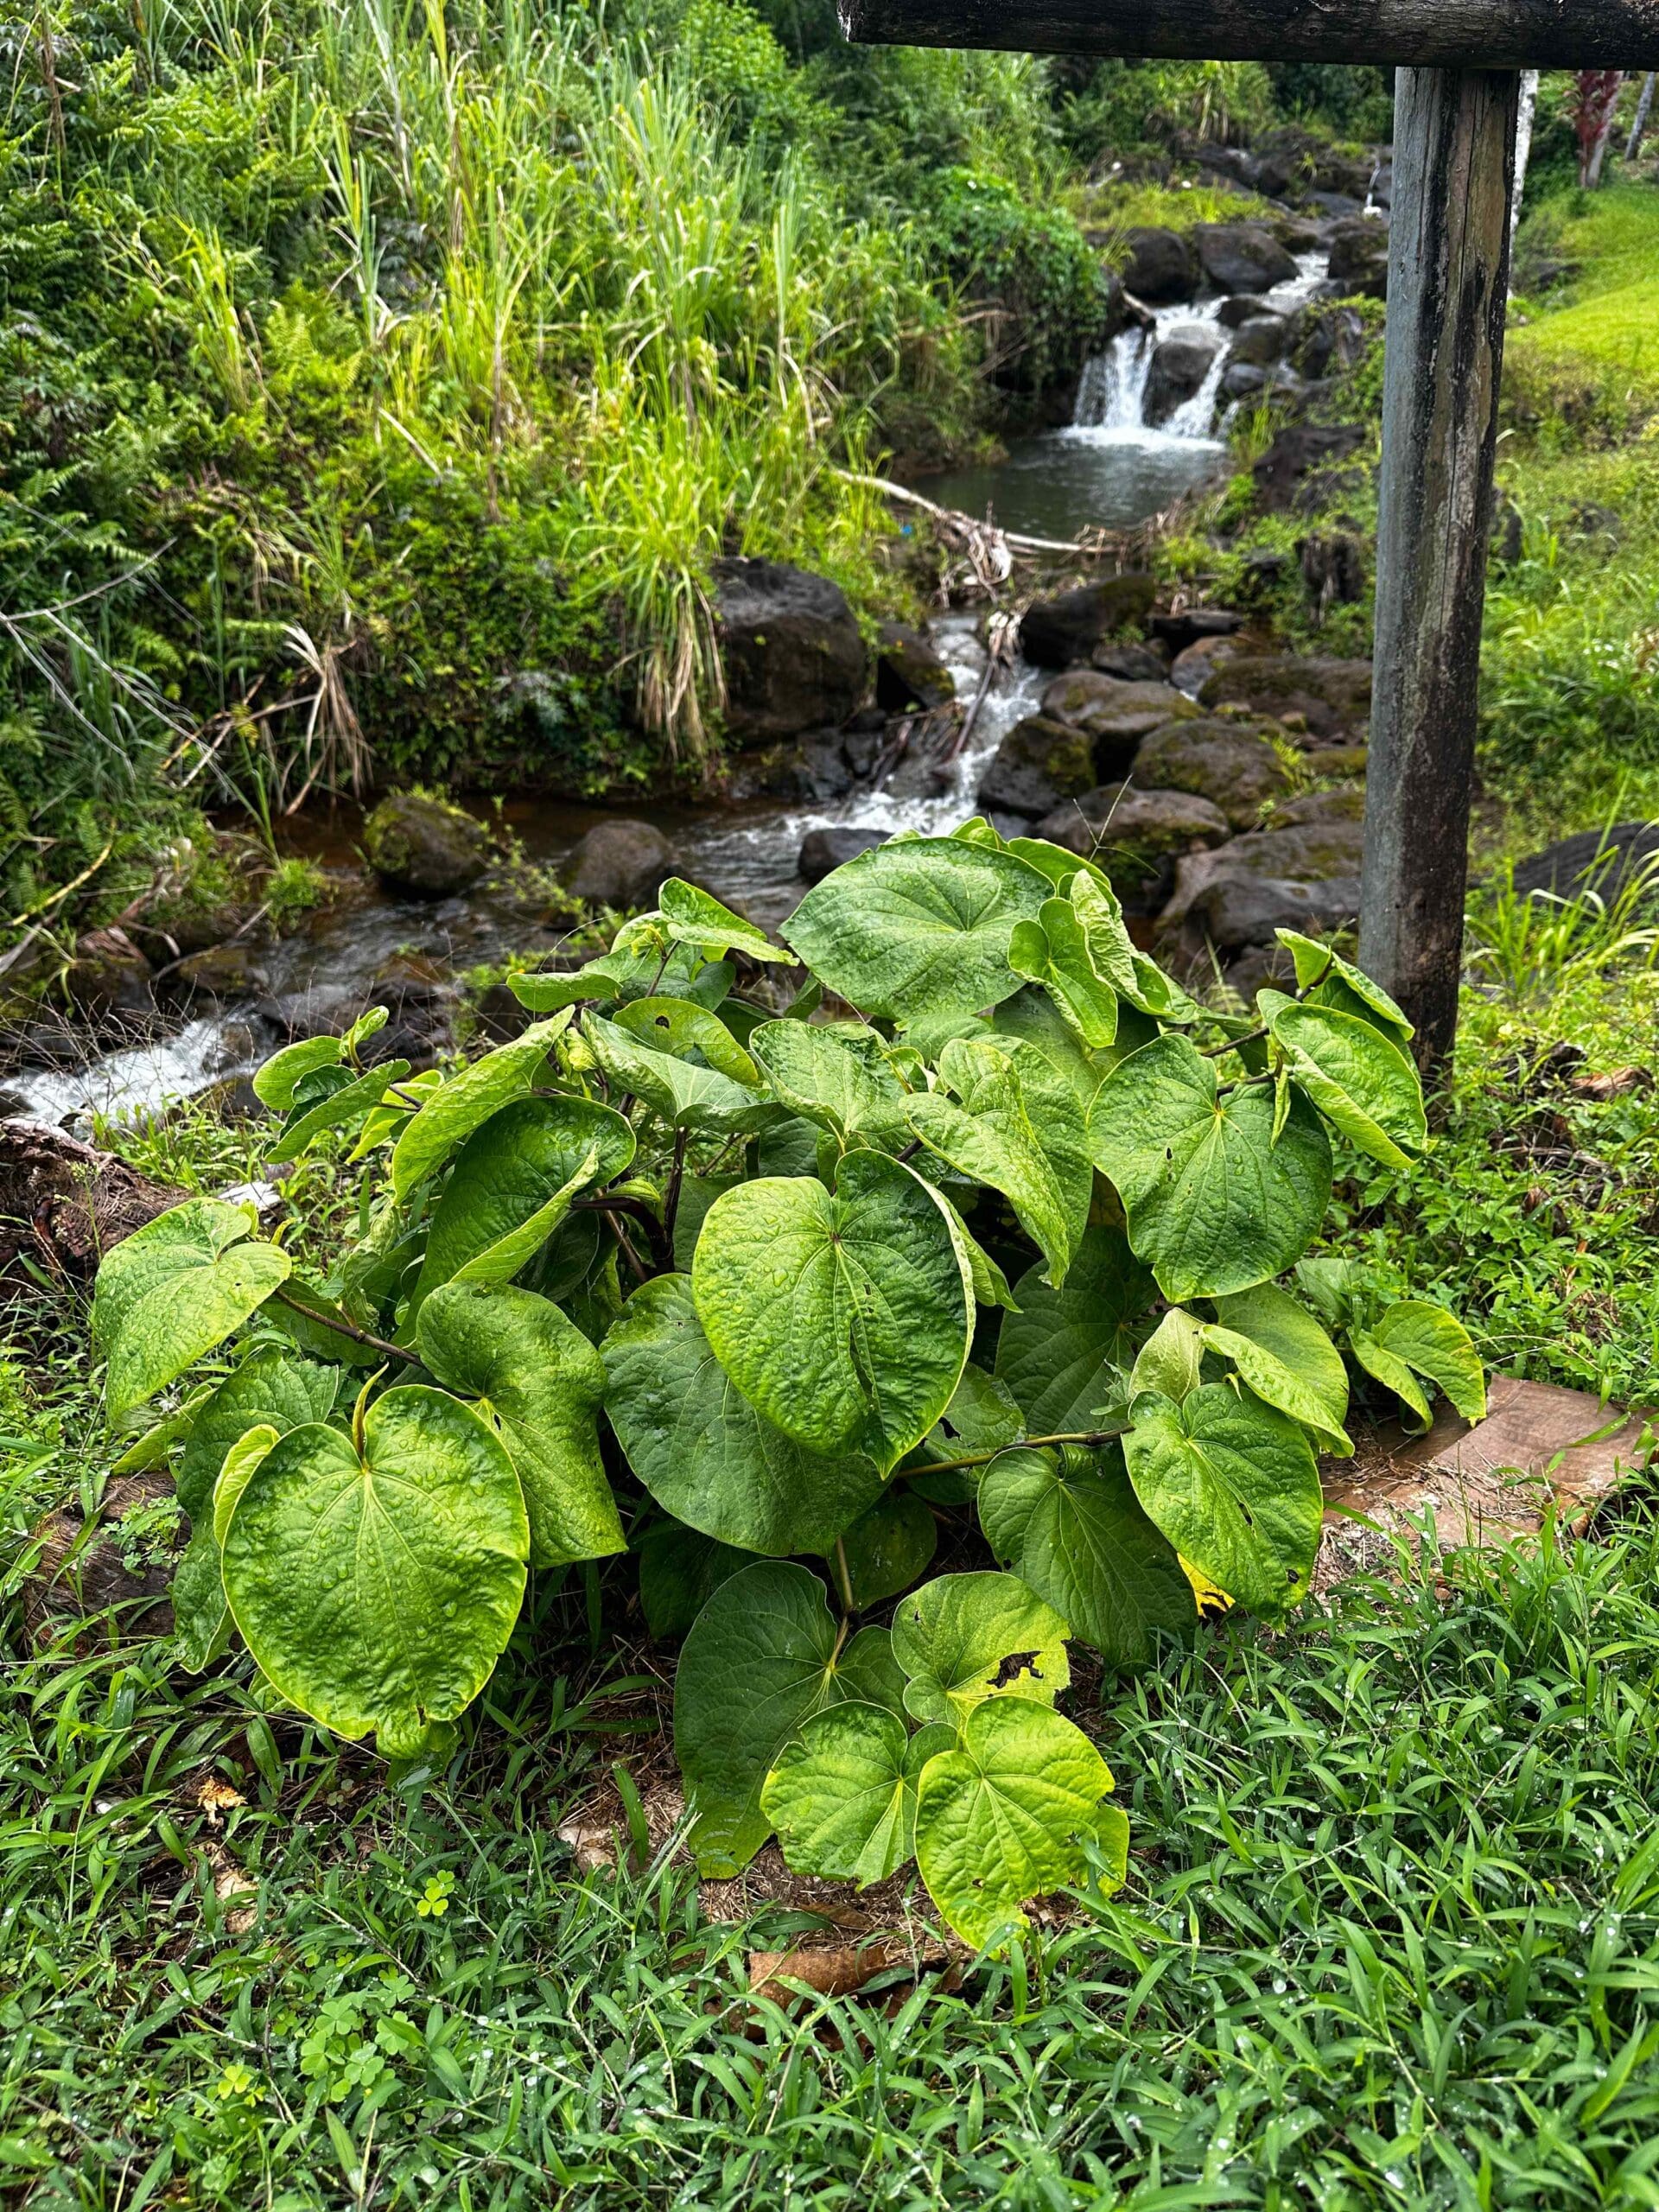 A fresh kava plant in front of a waterfall